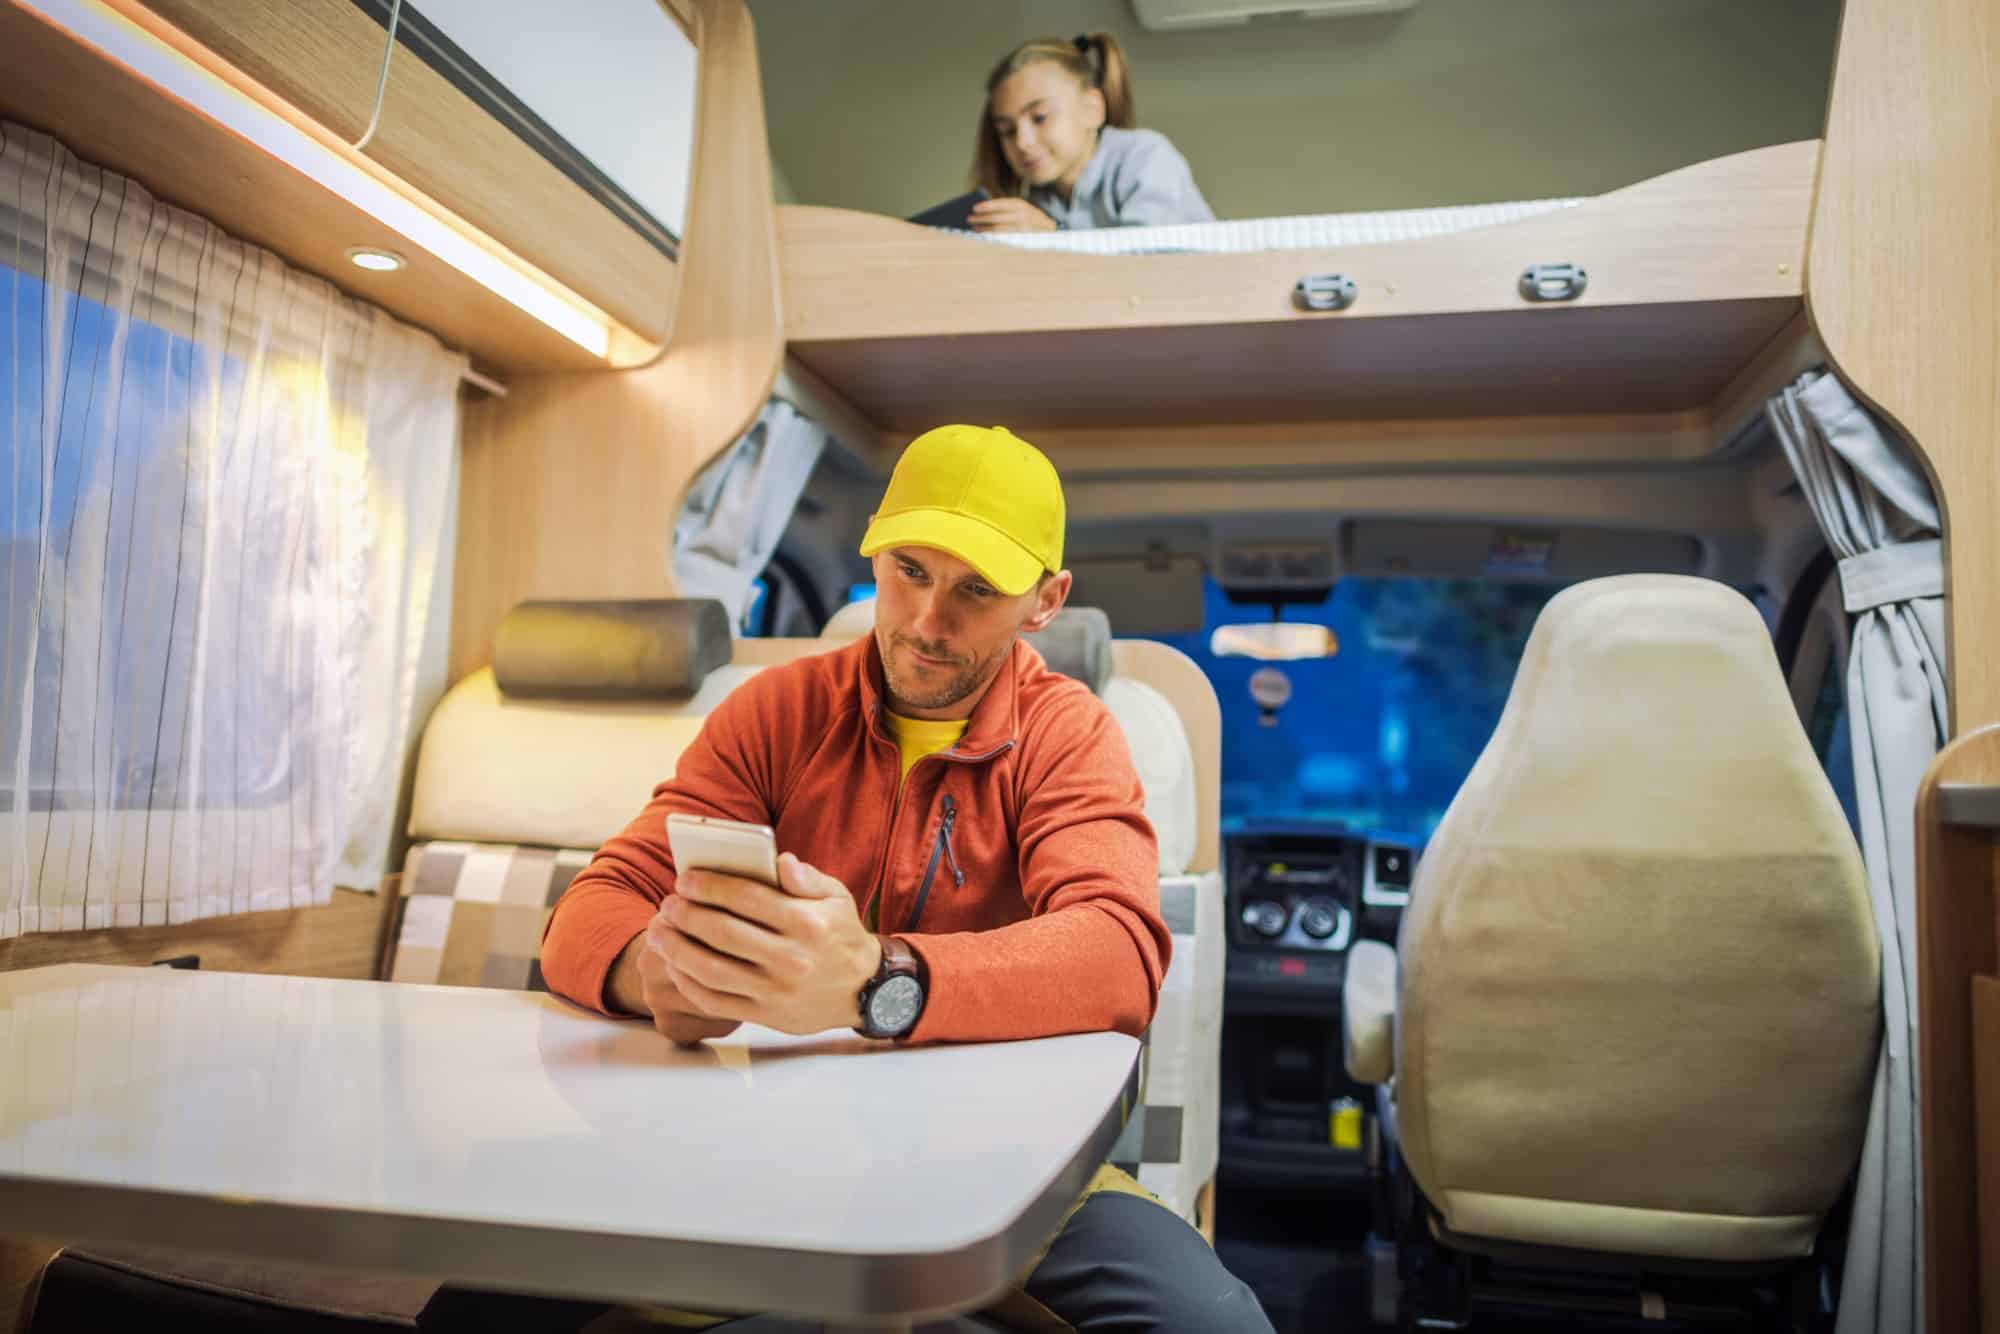 Man and girl using mobile devices inside RV